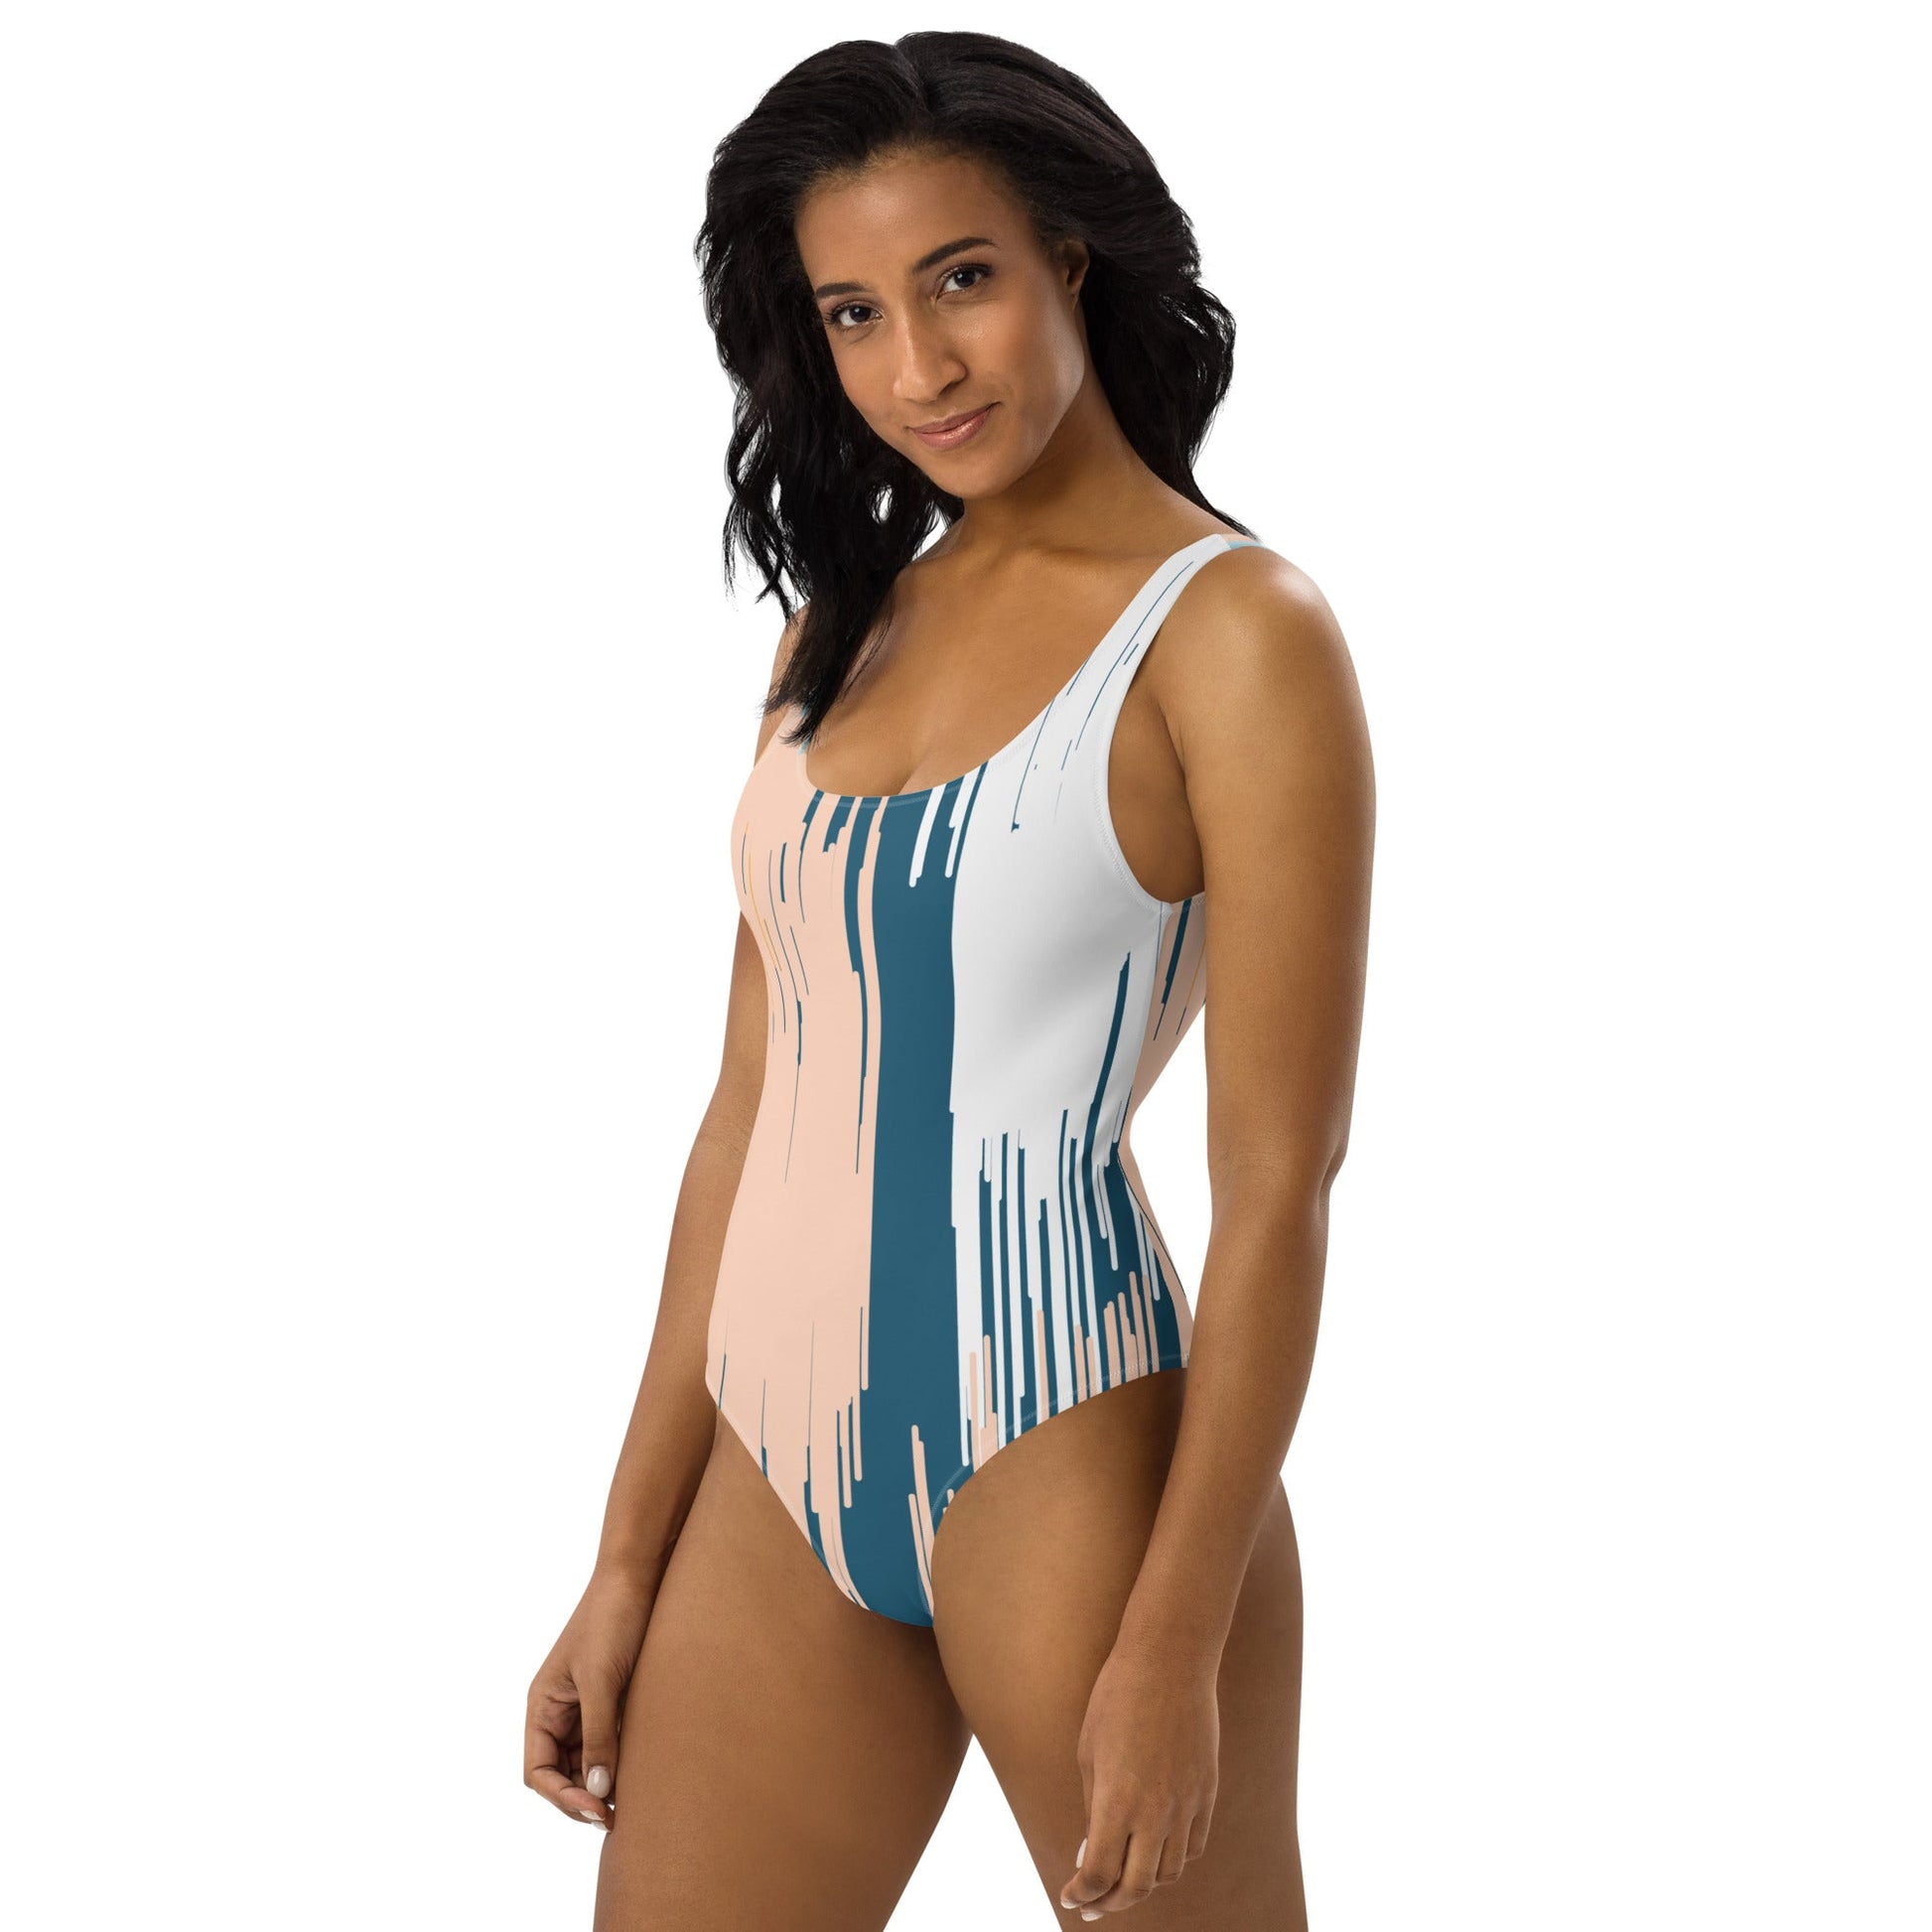 Classic One-Piece Swimsuit - Timeless Elegance and Comfort for Beach Days with Grace